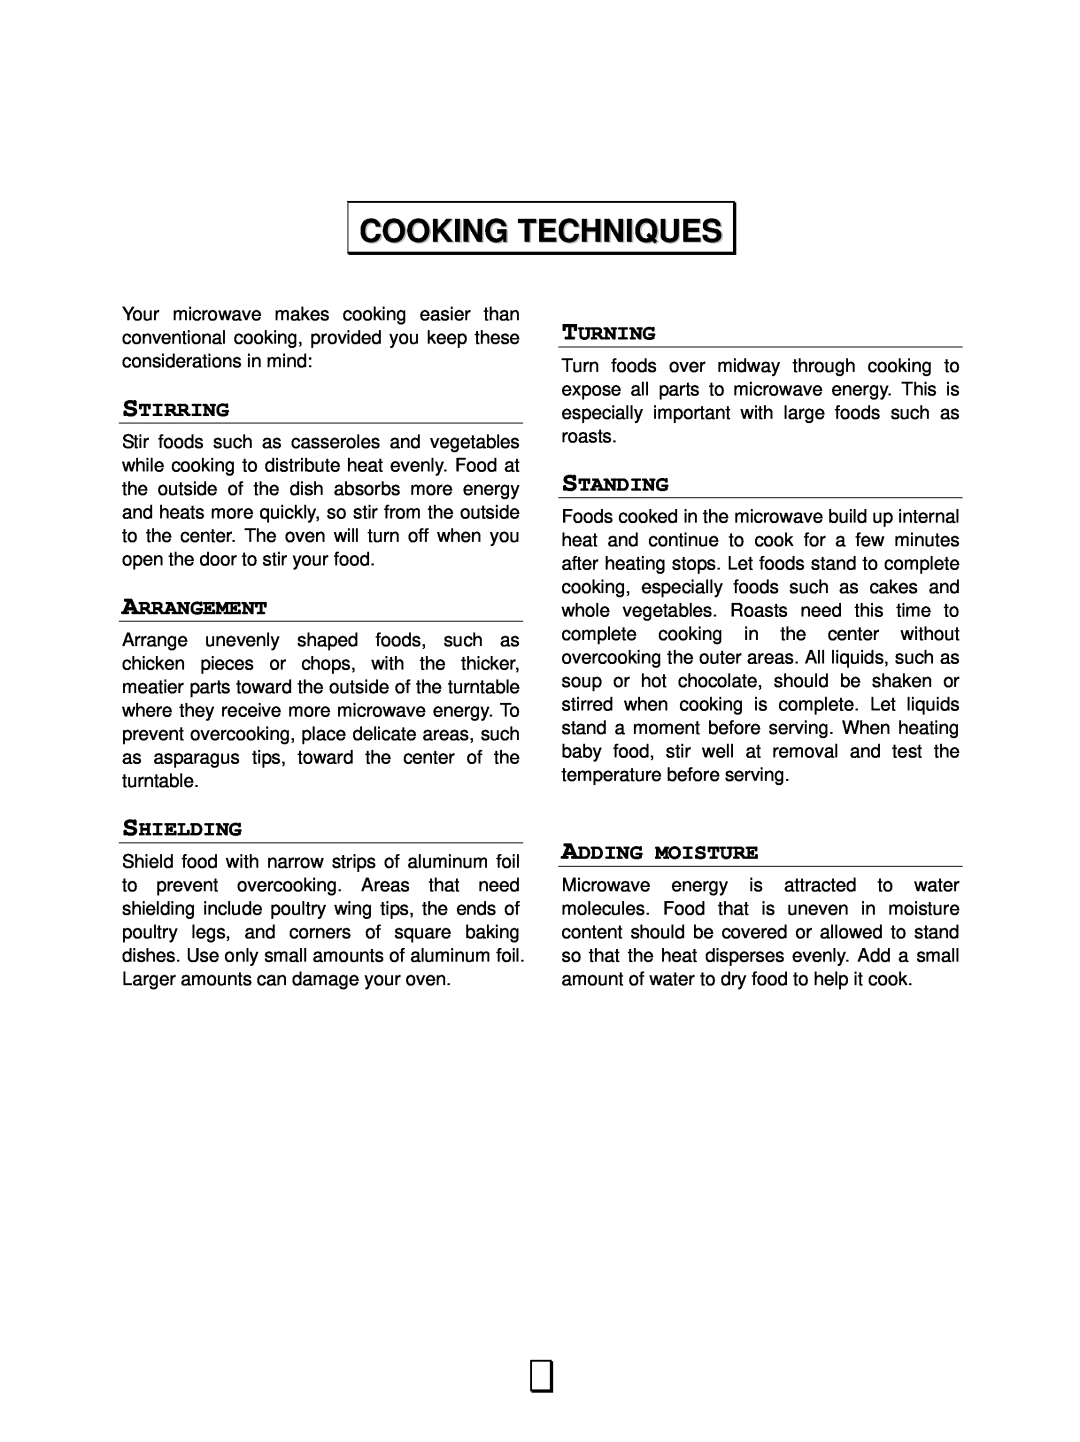 RCA RMW1156 owner manual Cooking Techniques, Stirring, Arrangement, Turning, Standing, Shielding, Adding Moisture 